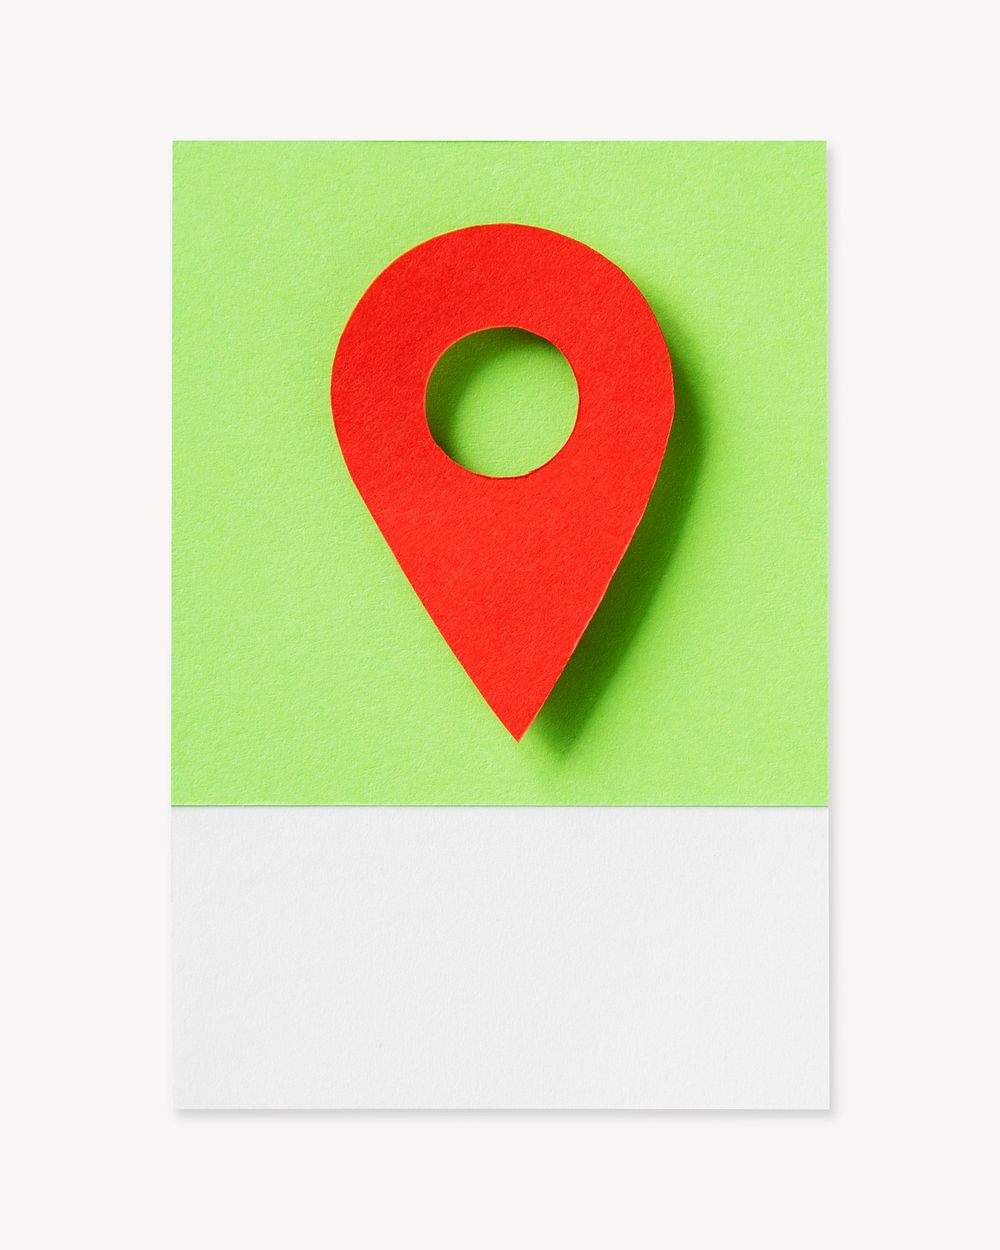 Map location marker icon isolated image